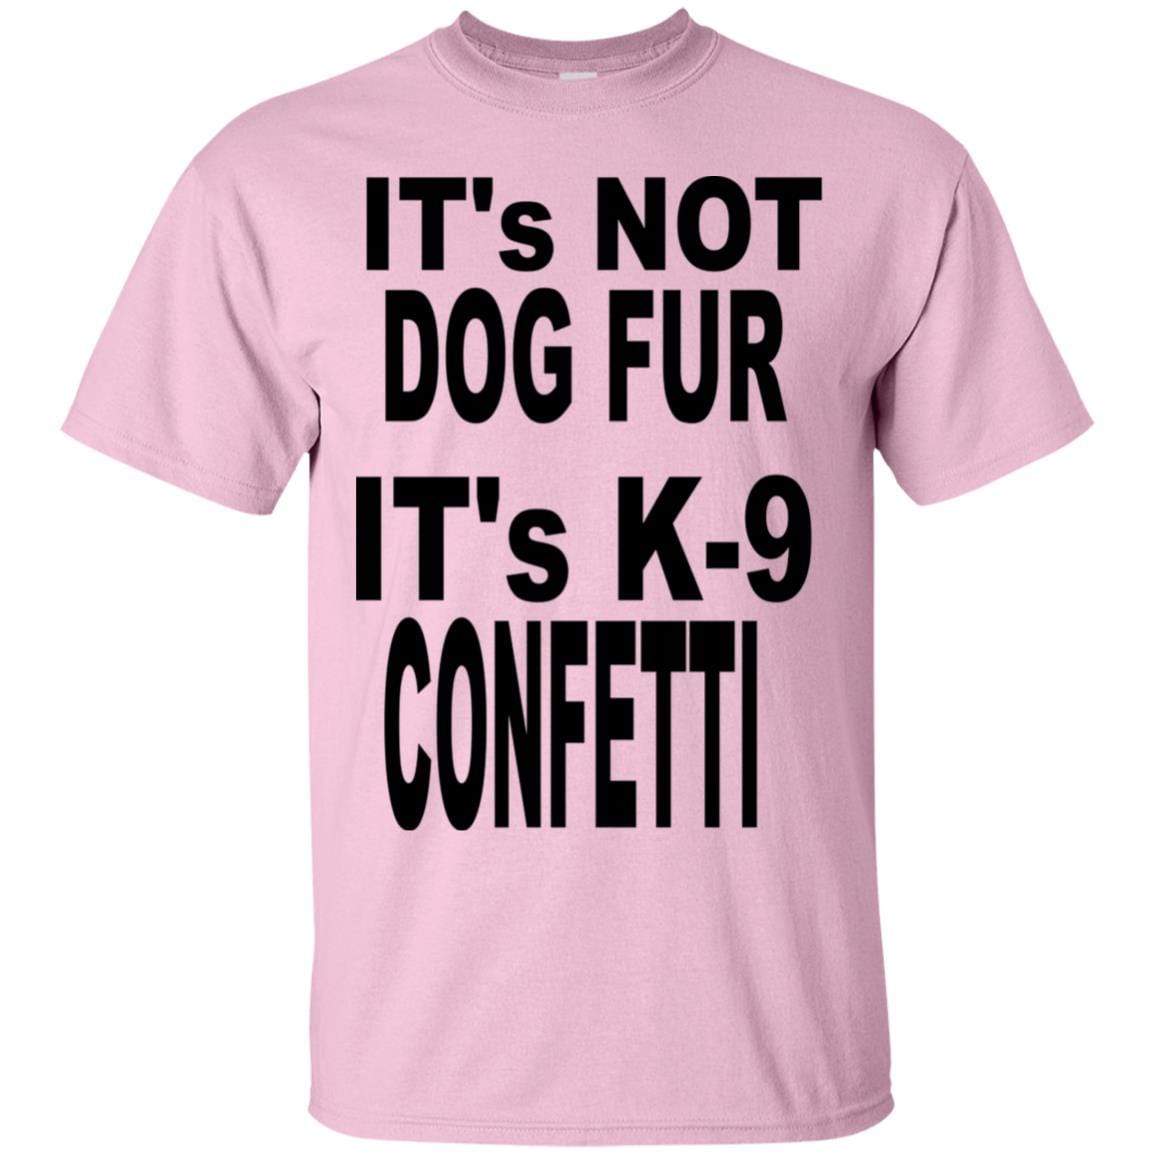 T-Shirts Light Pink / S WineyBitches.co "K9 Confetti" Bold Ultra Cotton T-Shirt-Blk Letters WineyBitchesCo